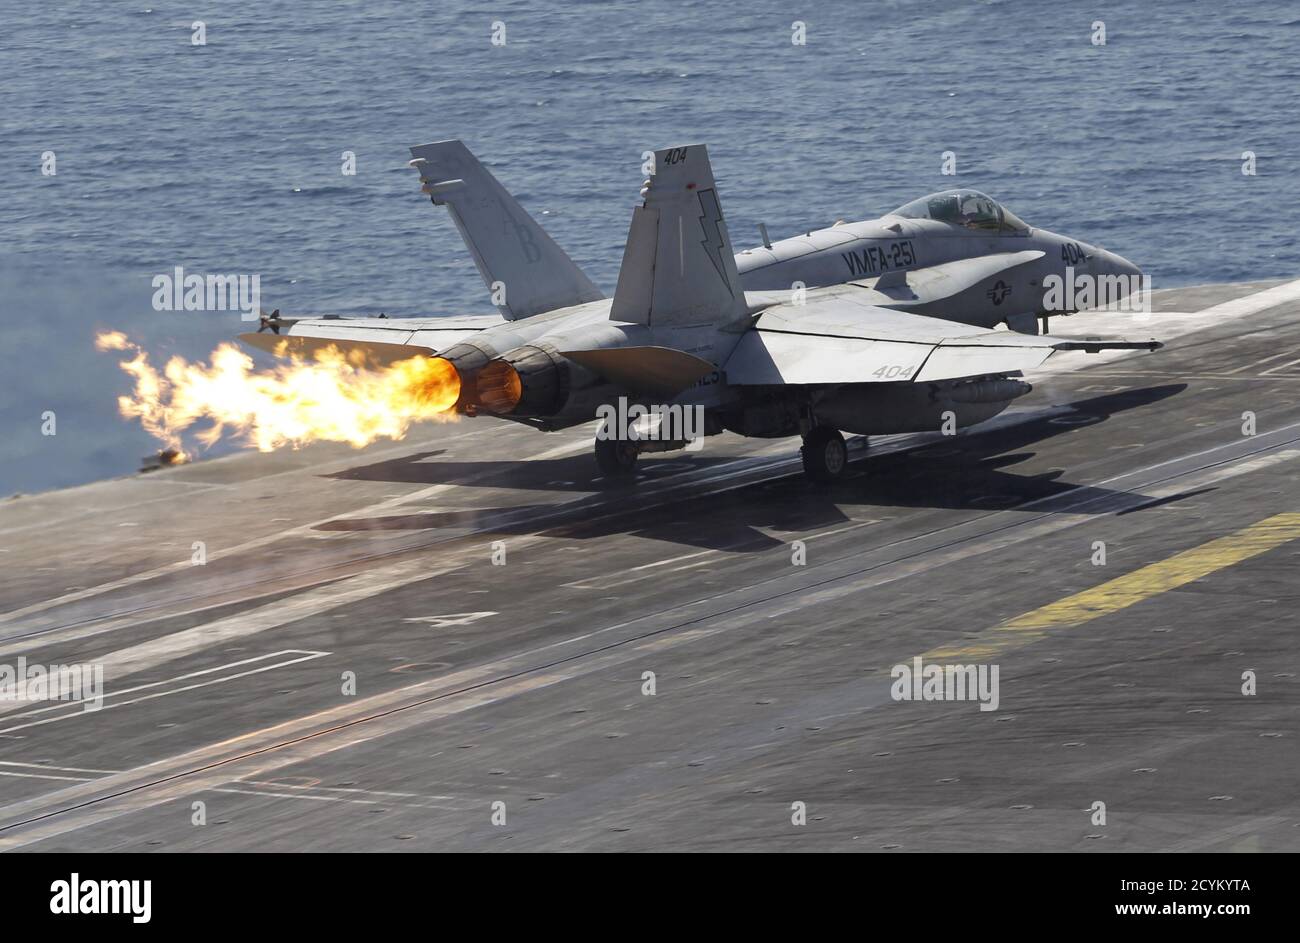 A F/A-18C Hornet of Marine Fighter Attack Squadron 251 (VMFA-251) is catapulted off the flight deck of the USS Theodore Roosevelt (CVN-71) aircraft carrier in the Gulf June 18, 2015. The U.S. carrier is deployed in the region to act as a platform to strike key positions taken over by the Islamic State fighters in Iraq and Syria, according to the ship's press officer. Picture taken June 18, 2015. REUTERS/Hamad I Mohammed Stock Photo